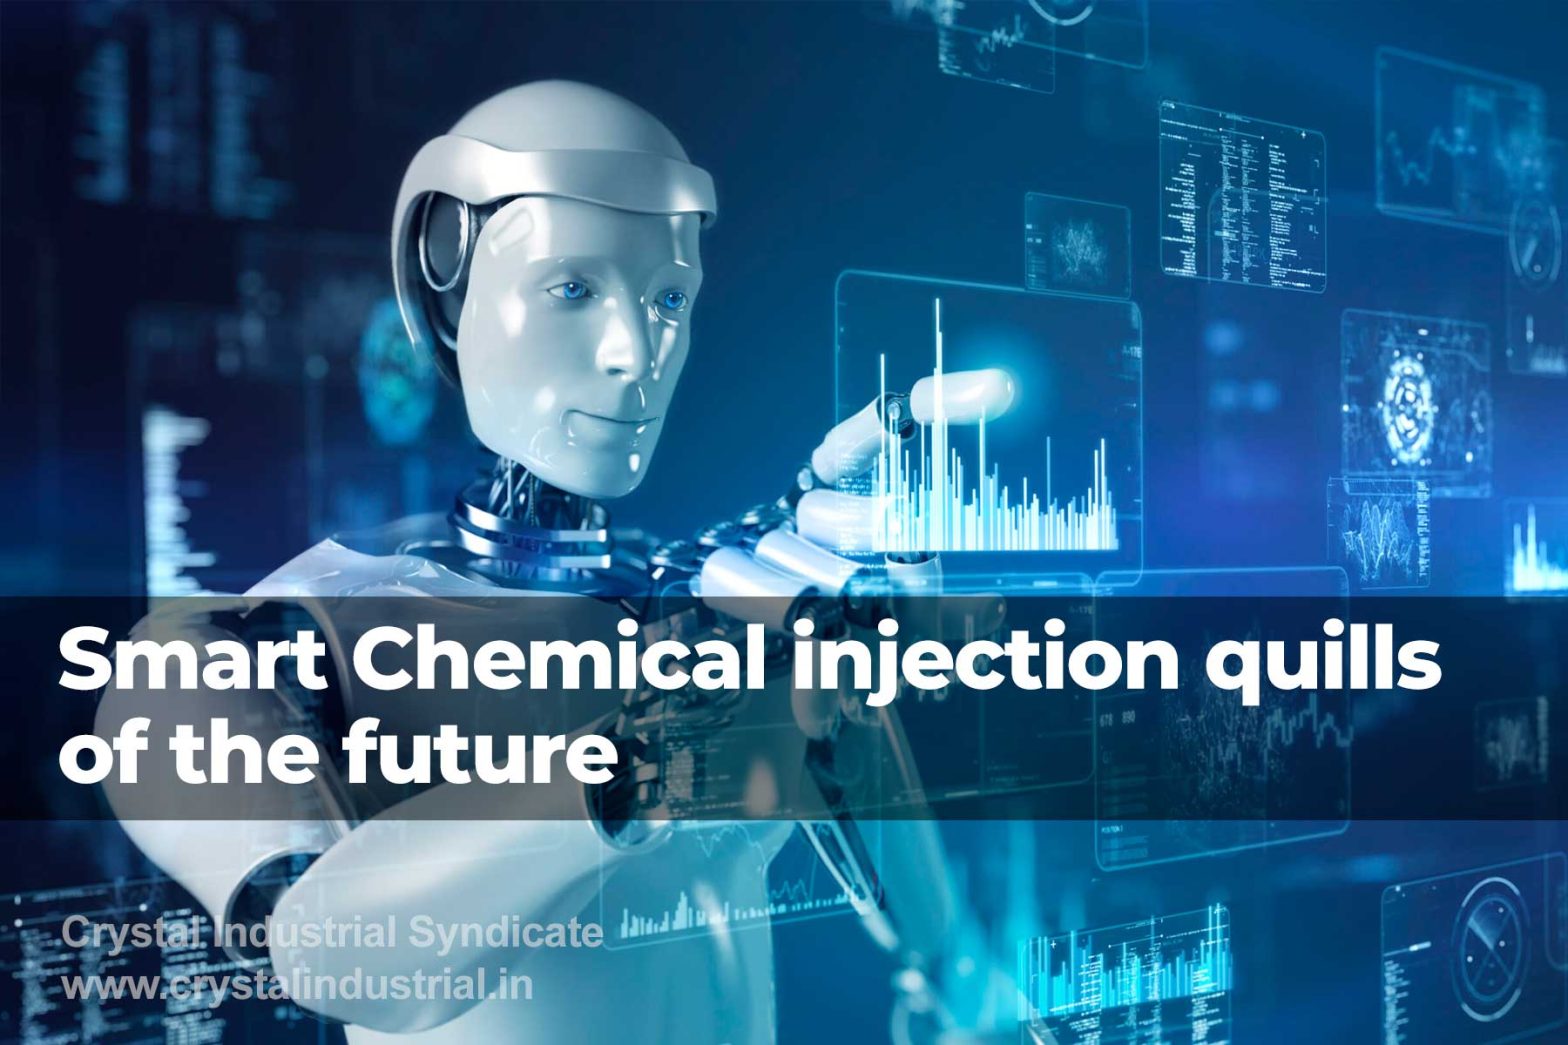 Smart chemical injection quills of the future with advanced algorithms for higher efficiencies